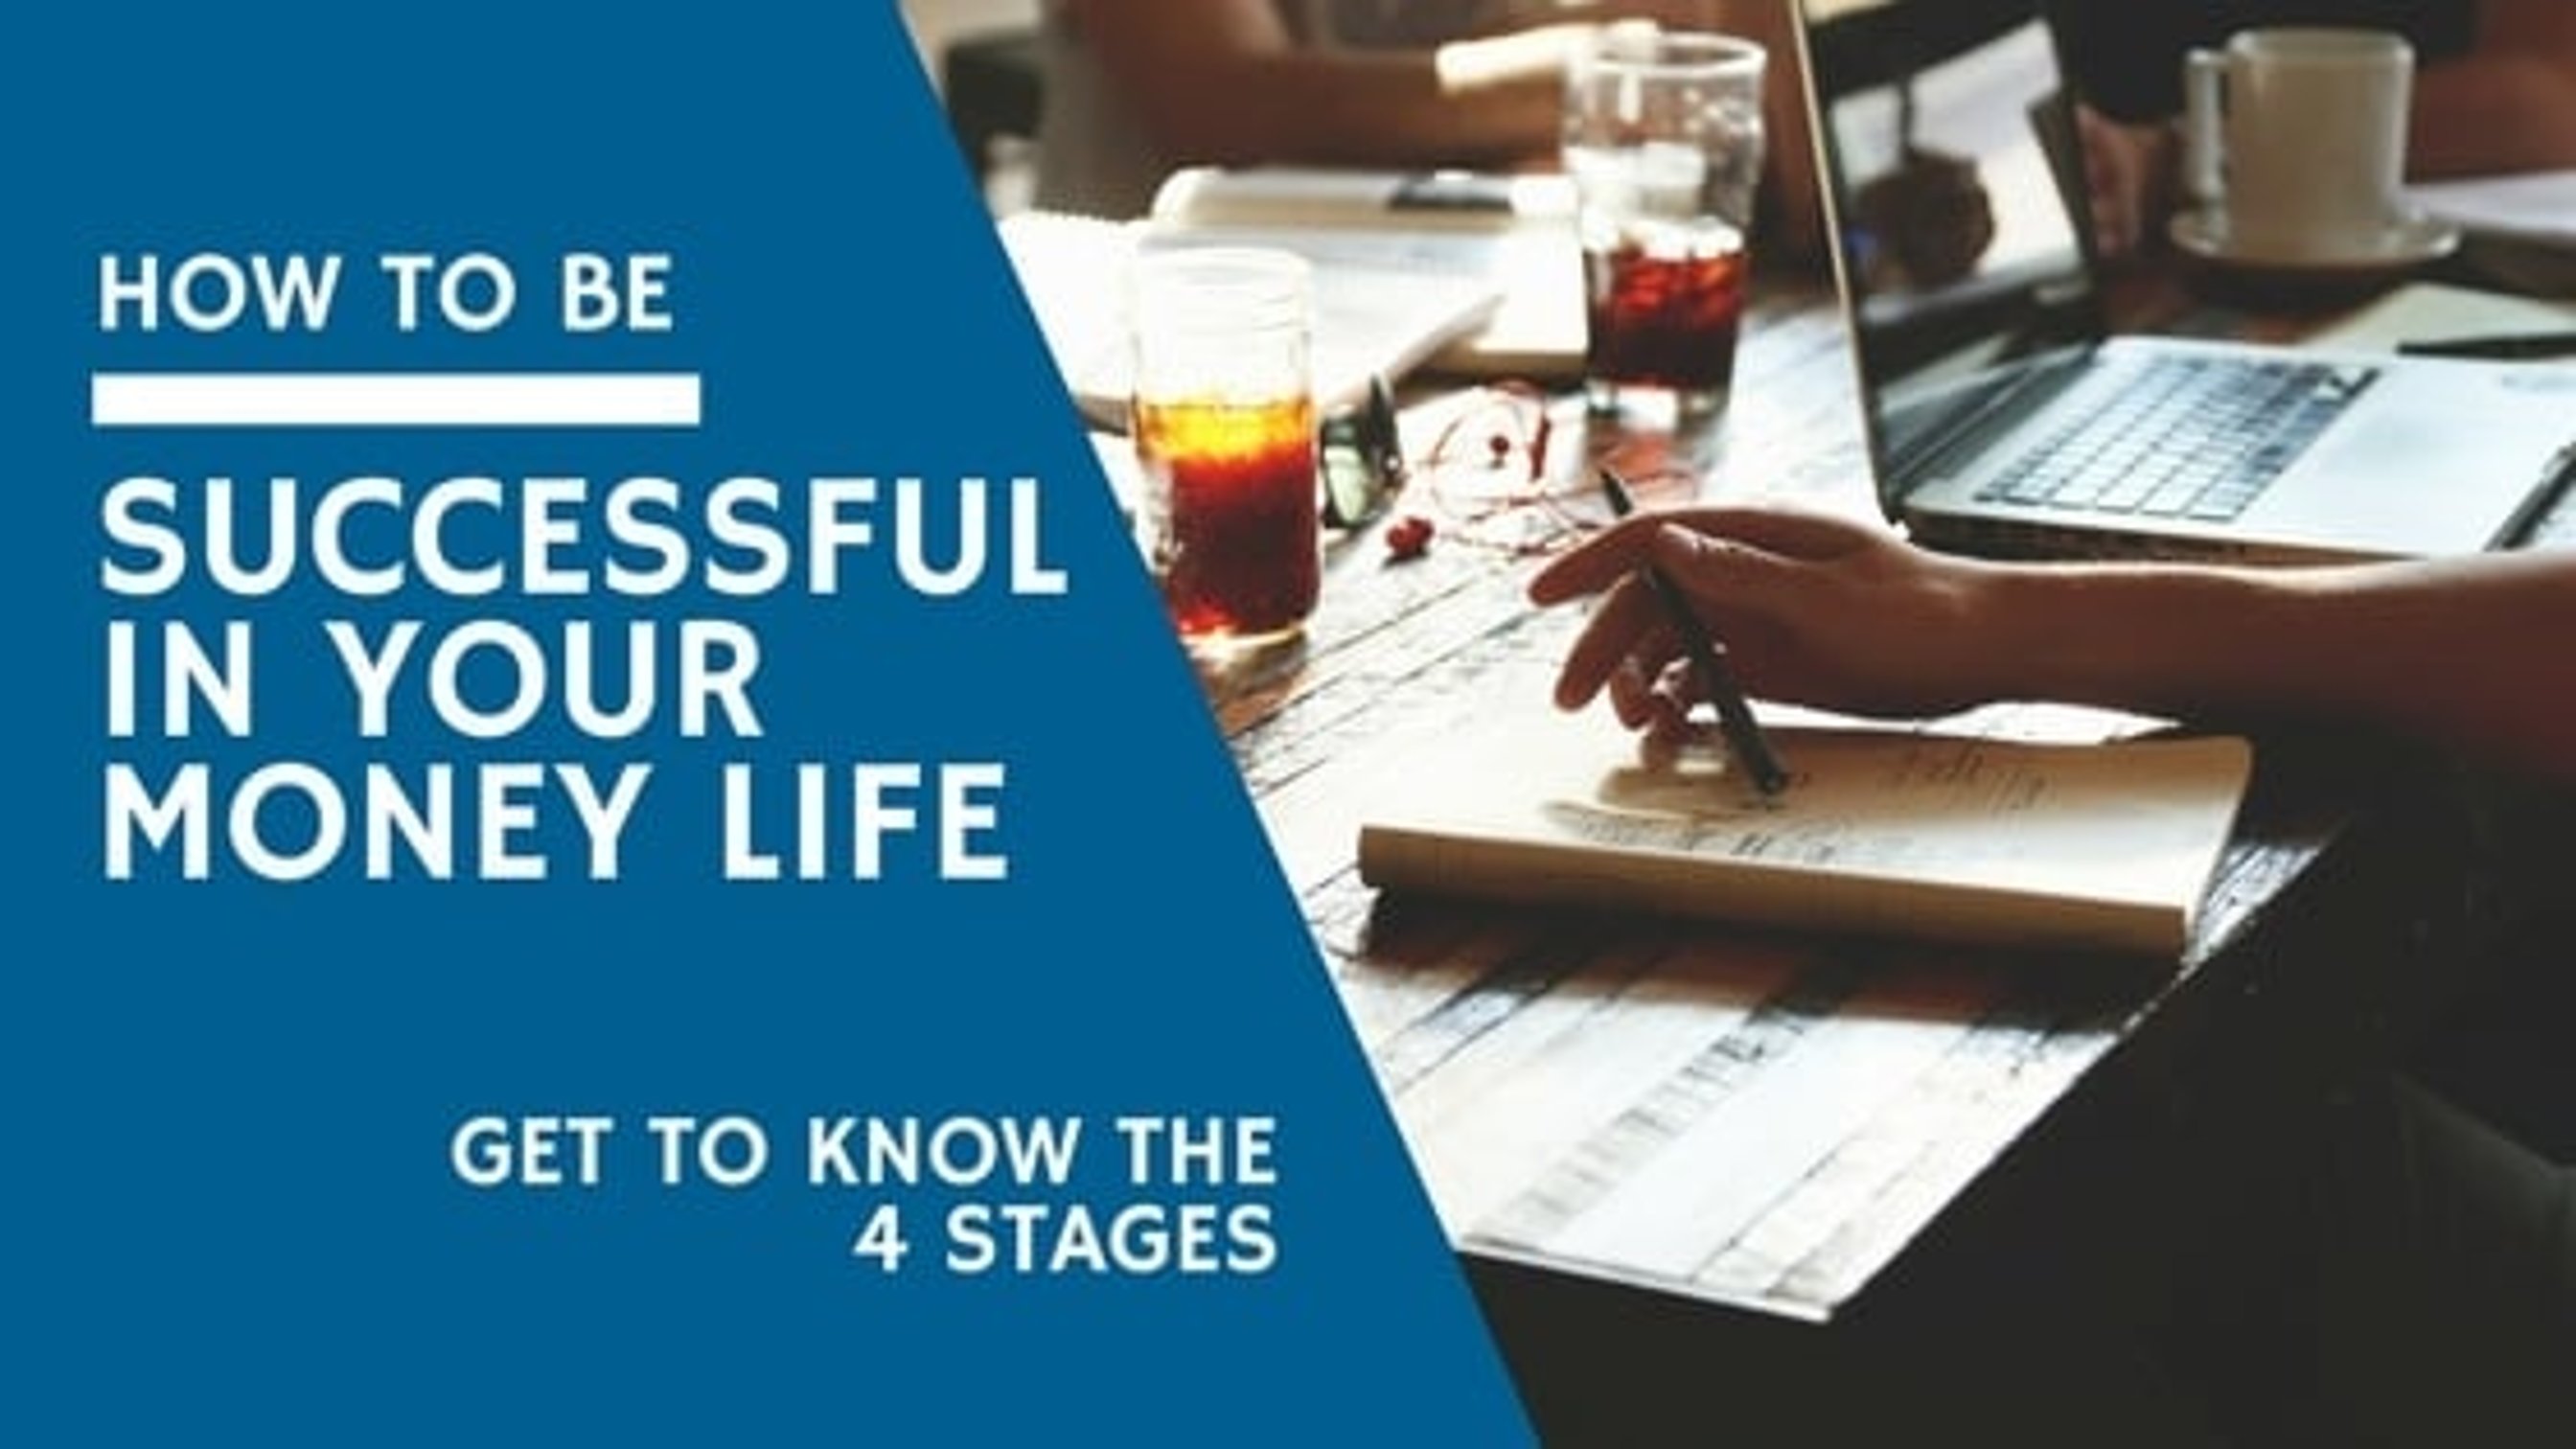 How to Be Successful in the 4 Most Important Stages of Your Money Life